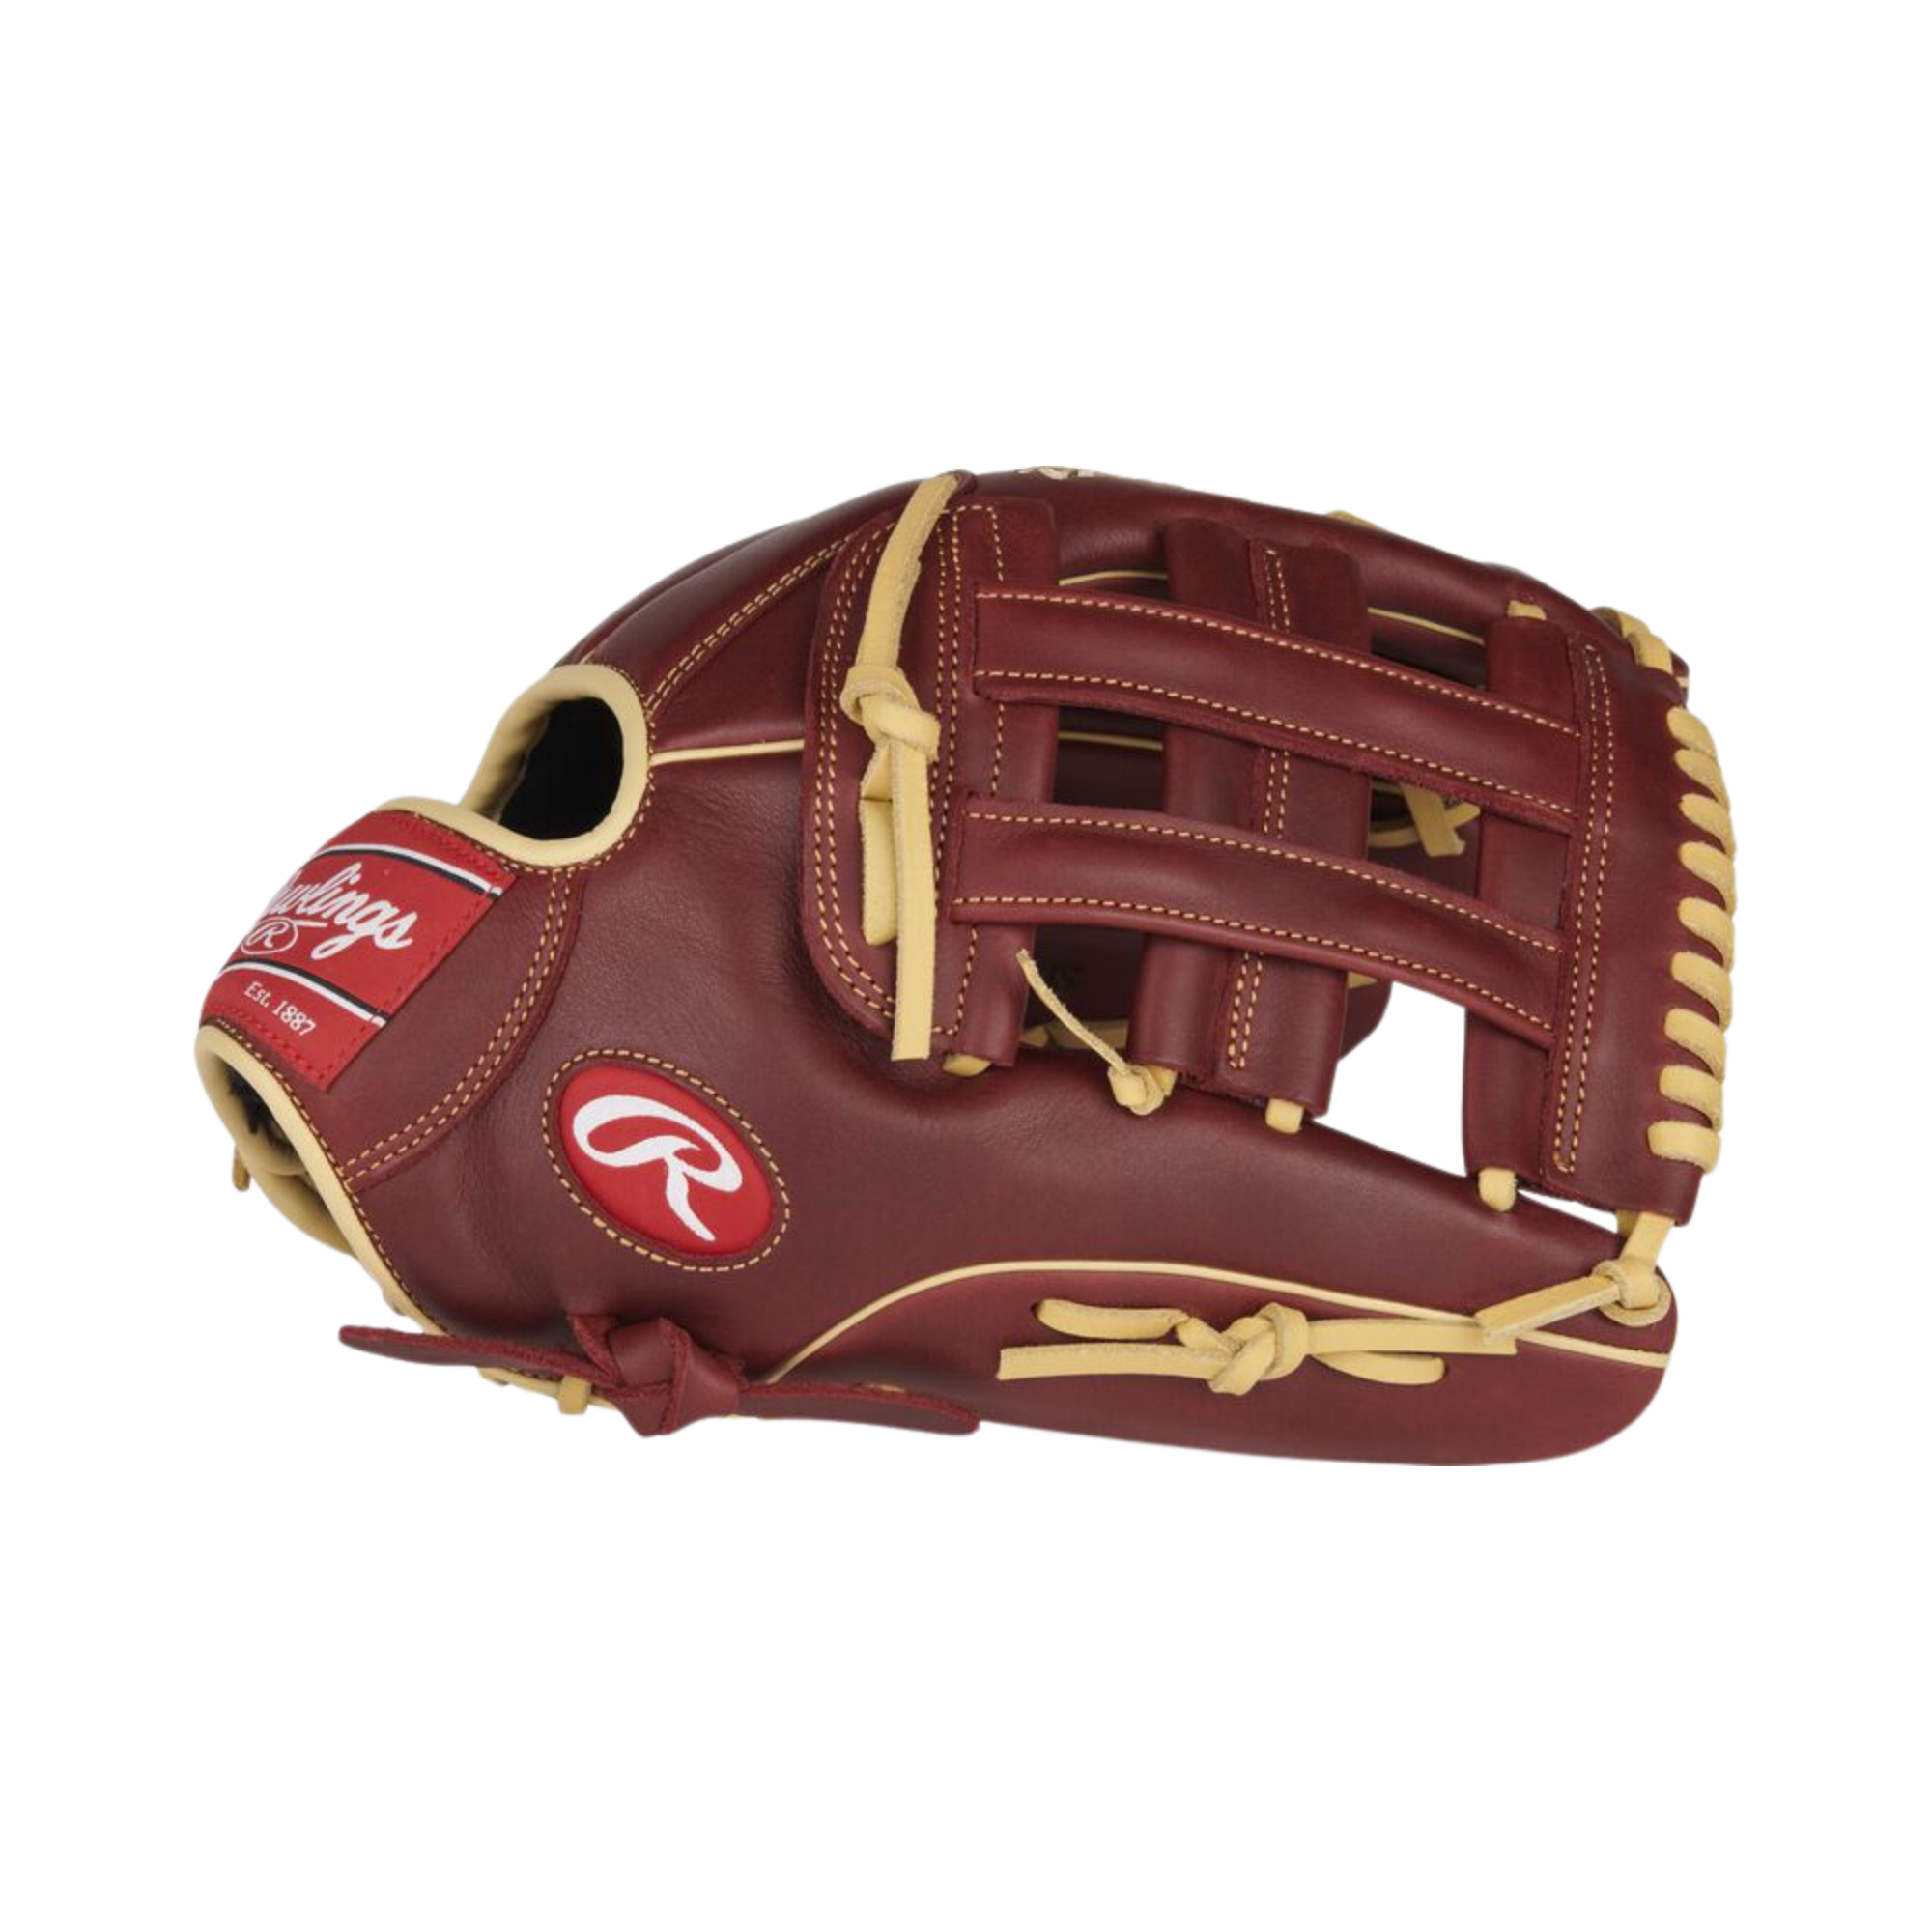 Rawlings Sandlot Series Outfield Glove 12.75"LHT